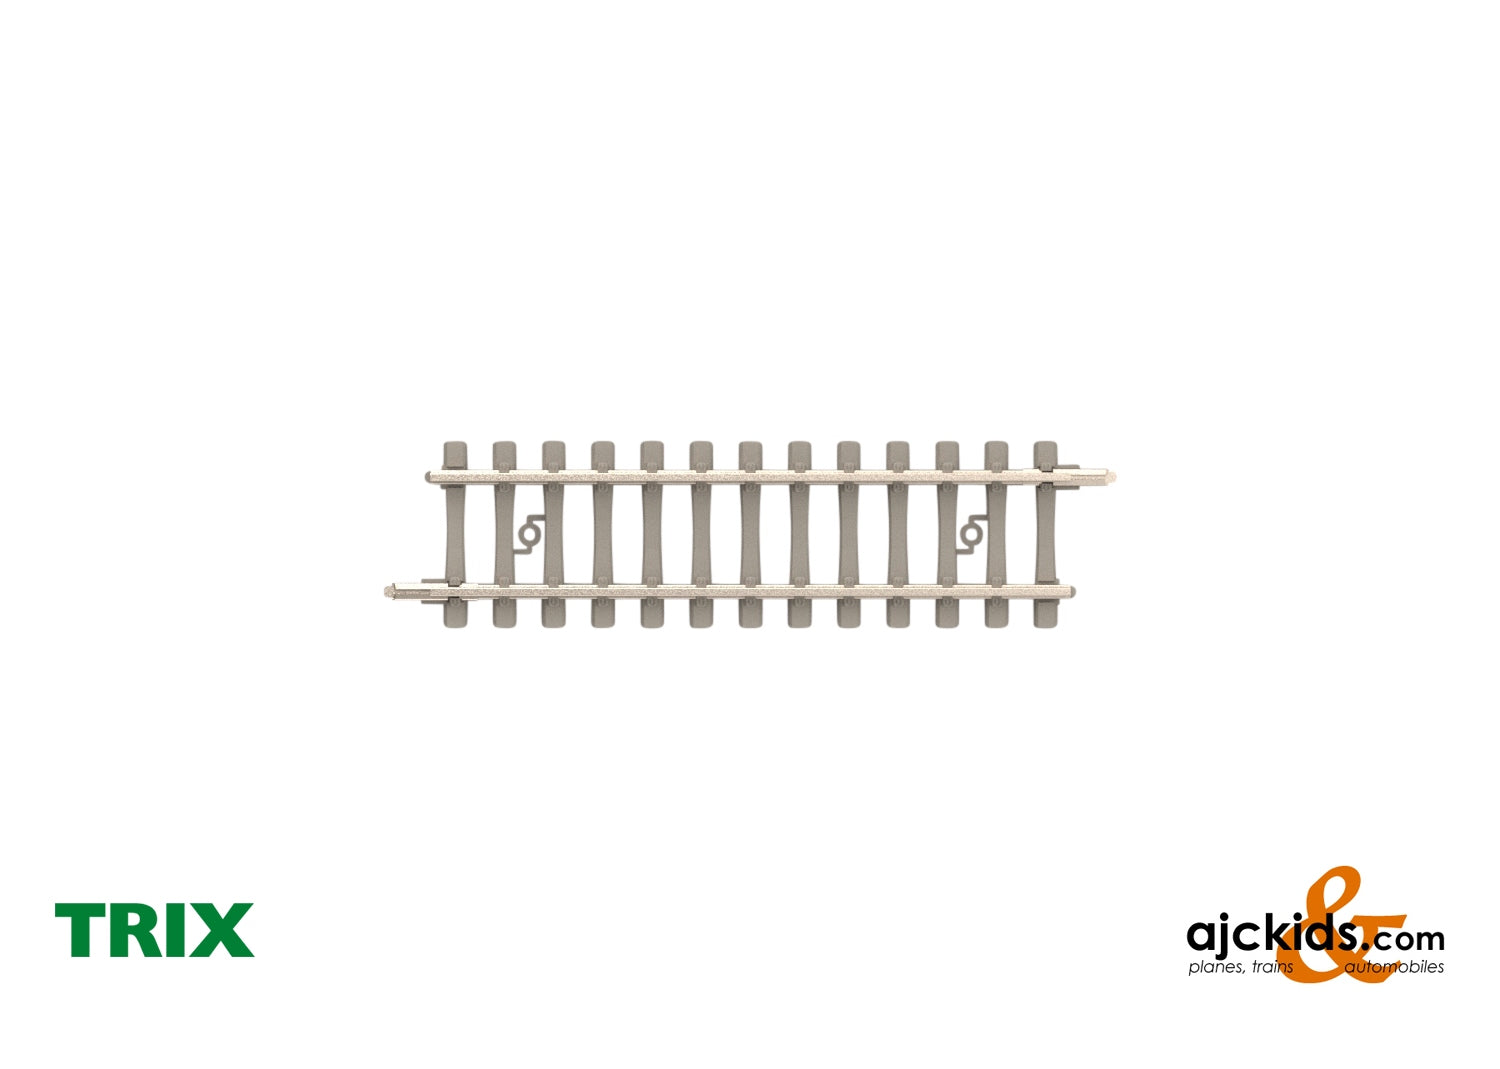 Trix 14506 - Straight Track with Concrete Ties